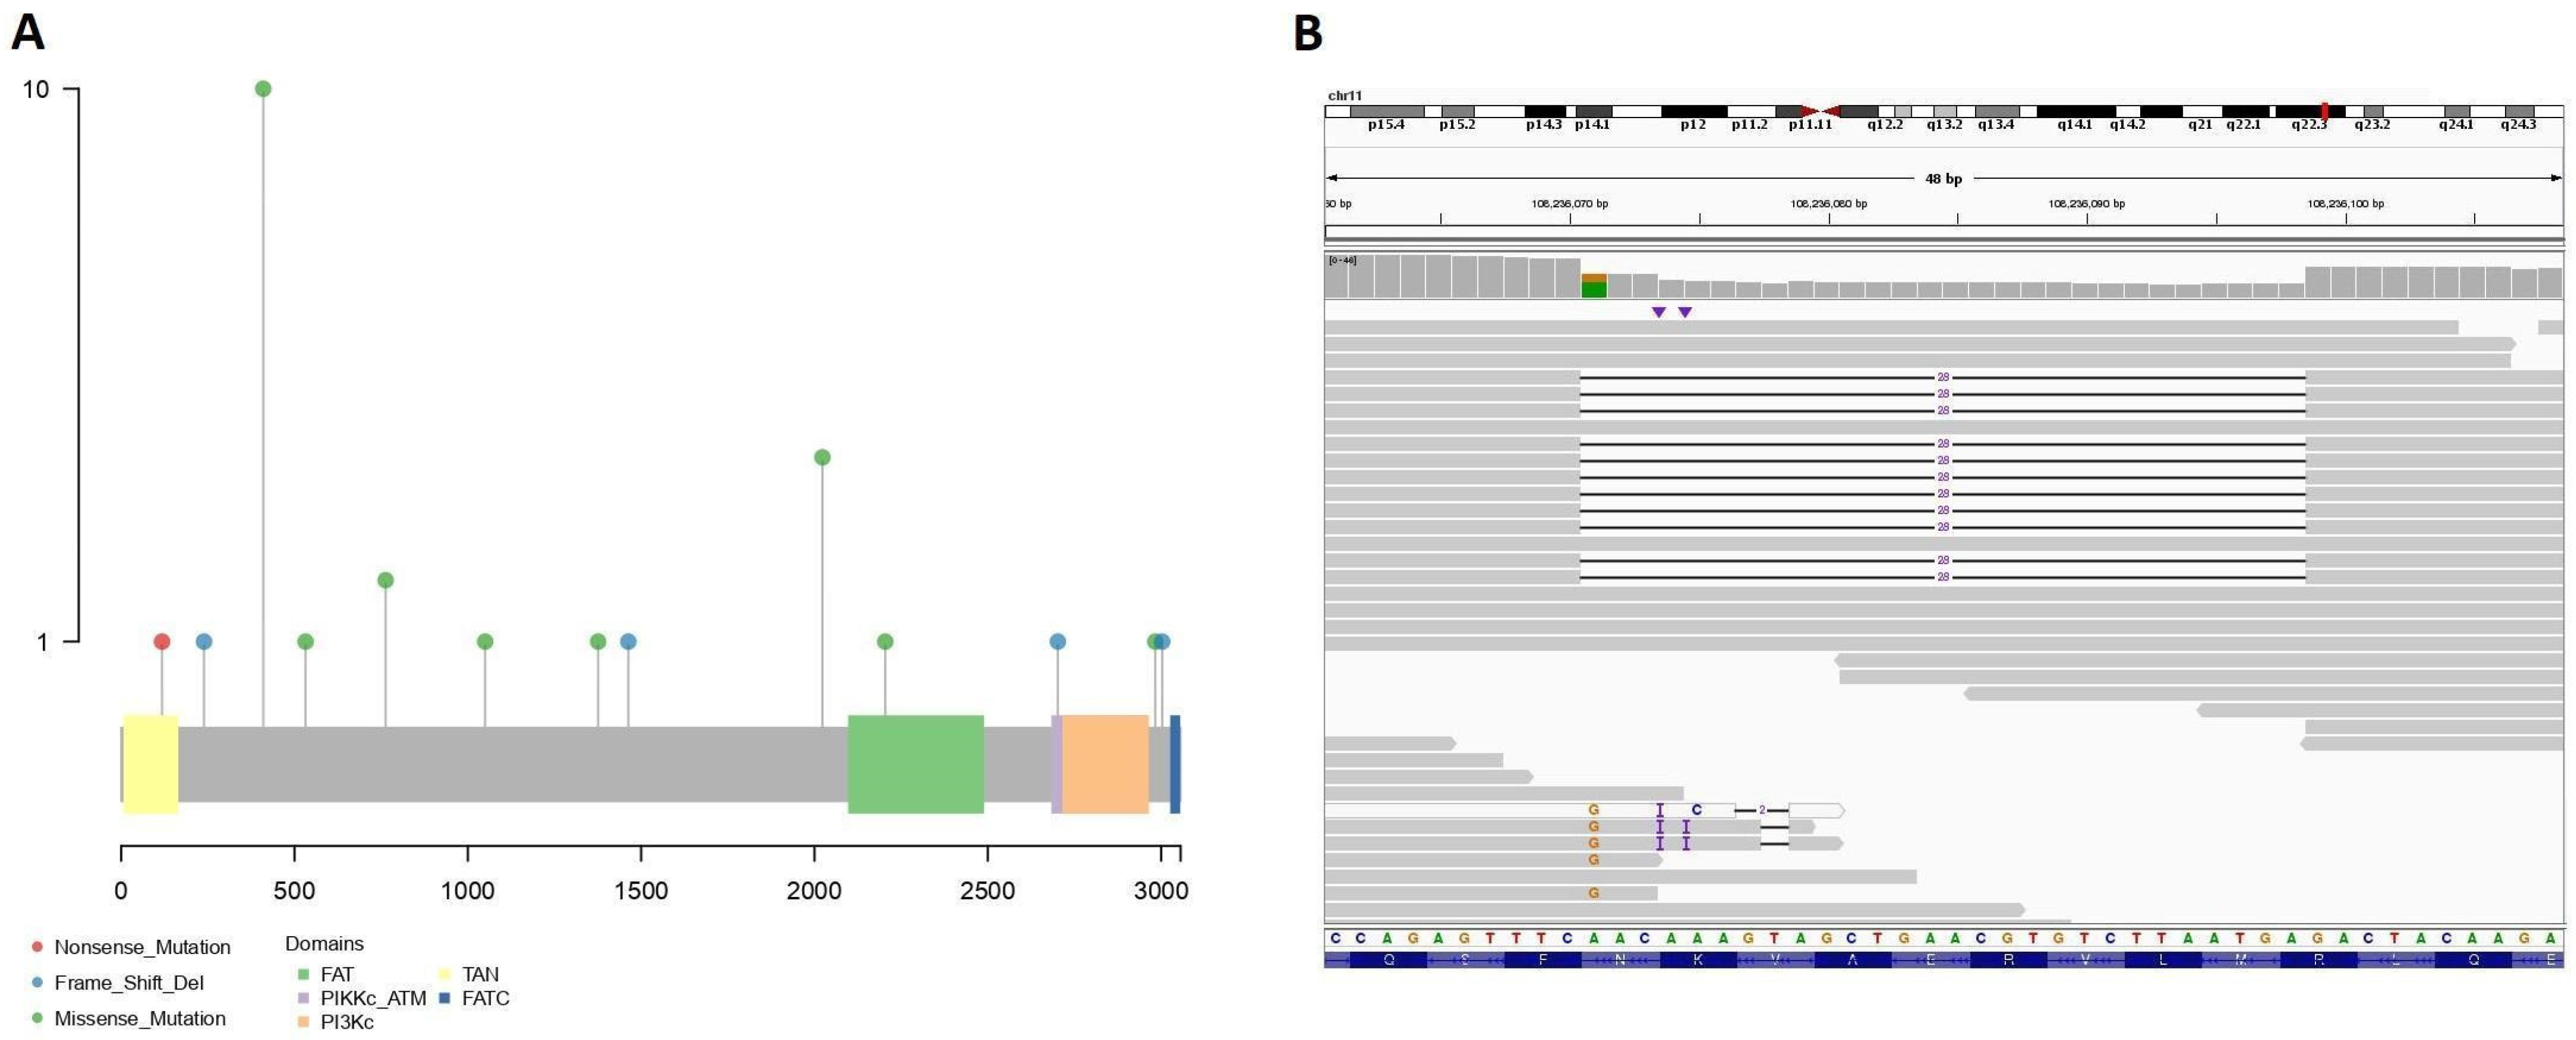 Cancers | Free Full-Text | Detection of Rare Germline Variants in the  Genomes of Patients with B-Cell Neoplasms | HTML